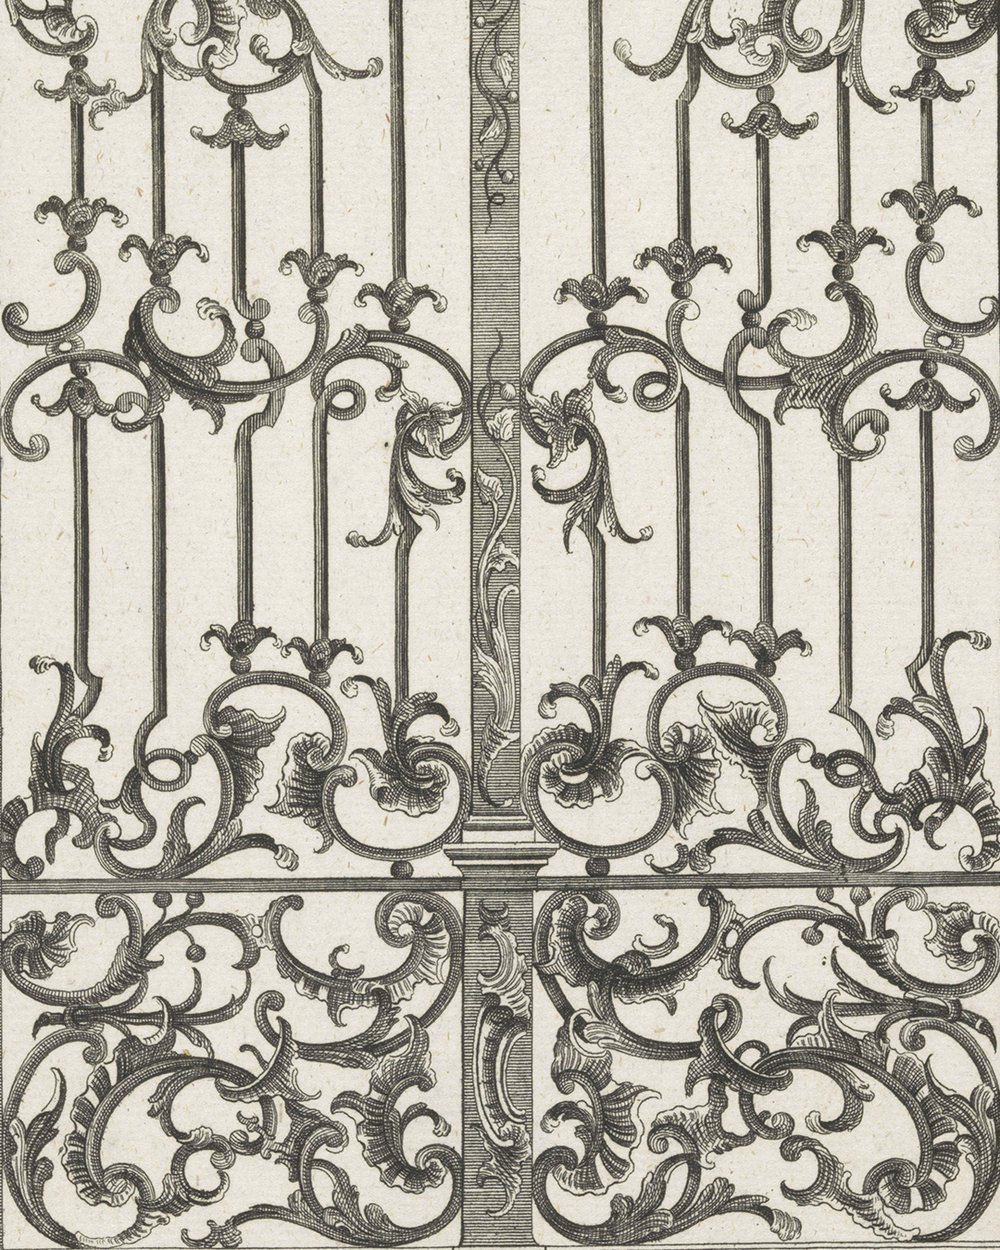 ''Wrought iron gate with floral motifs'' (1719 - 1749)